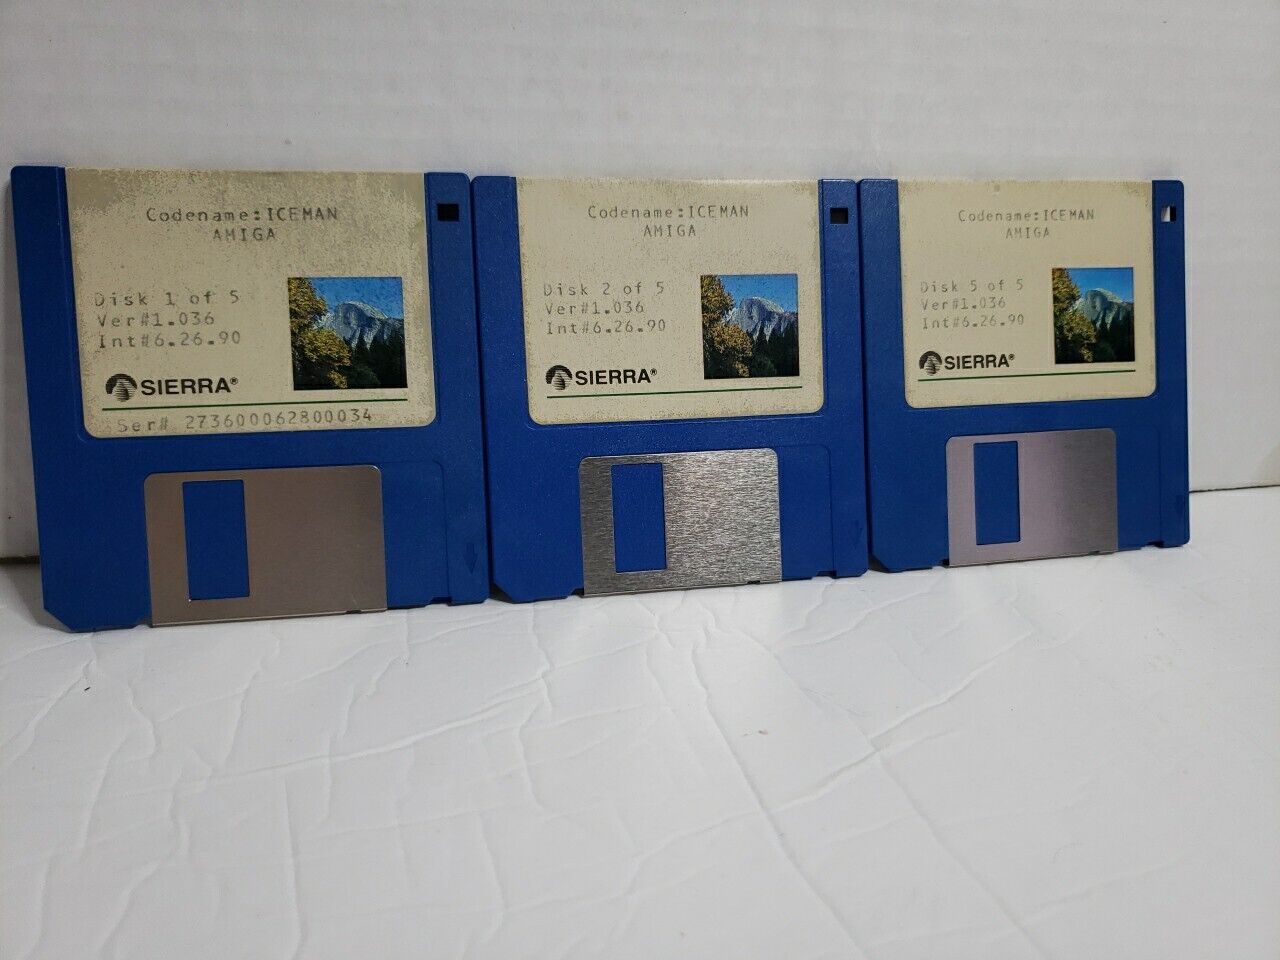 Codename: Iceman Commodore Amiga Game Disks On 3.5 Inch Disks. Disks 1, 2 And 5.